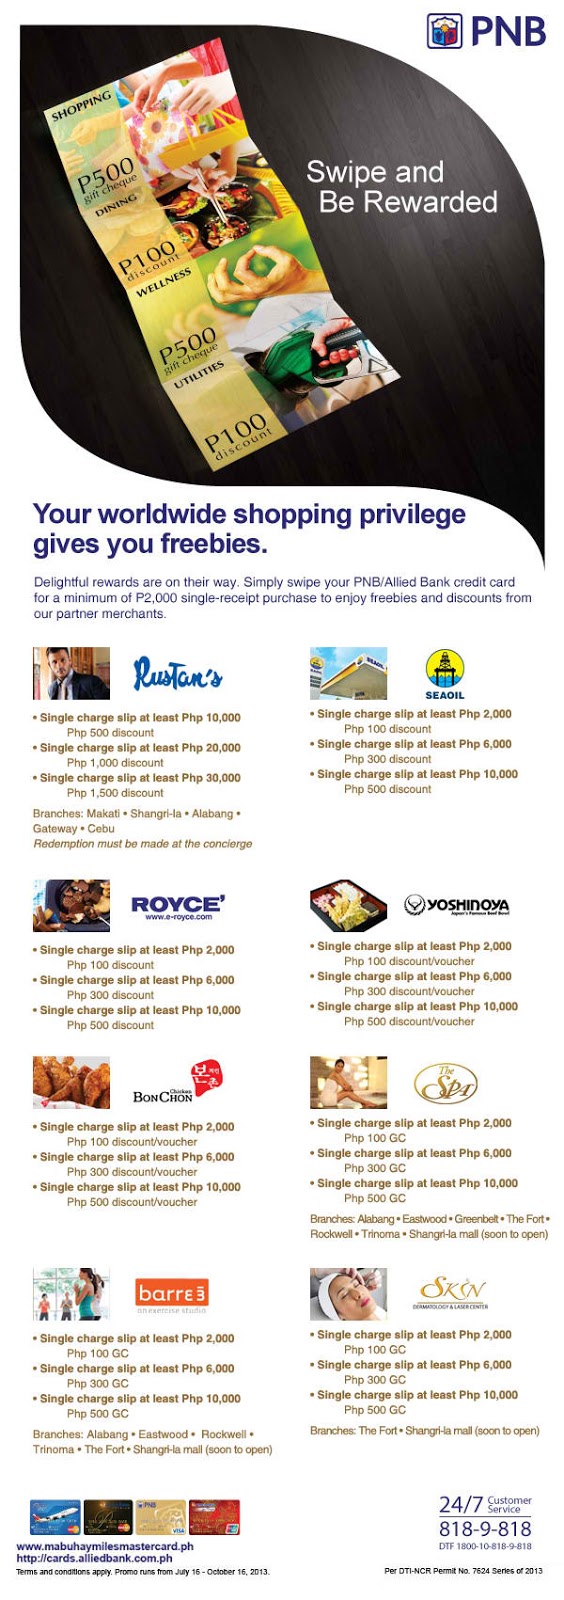 credit-card-promo-pnb-allied-bank-july-16-october-16-2013